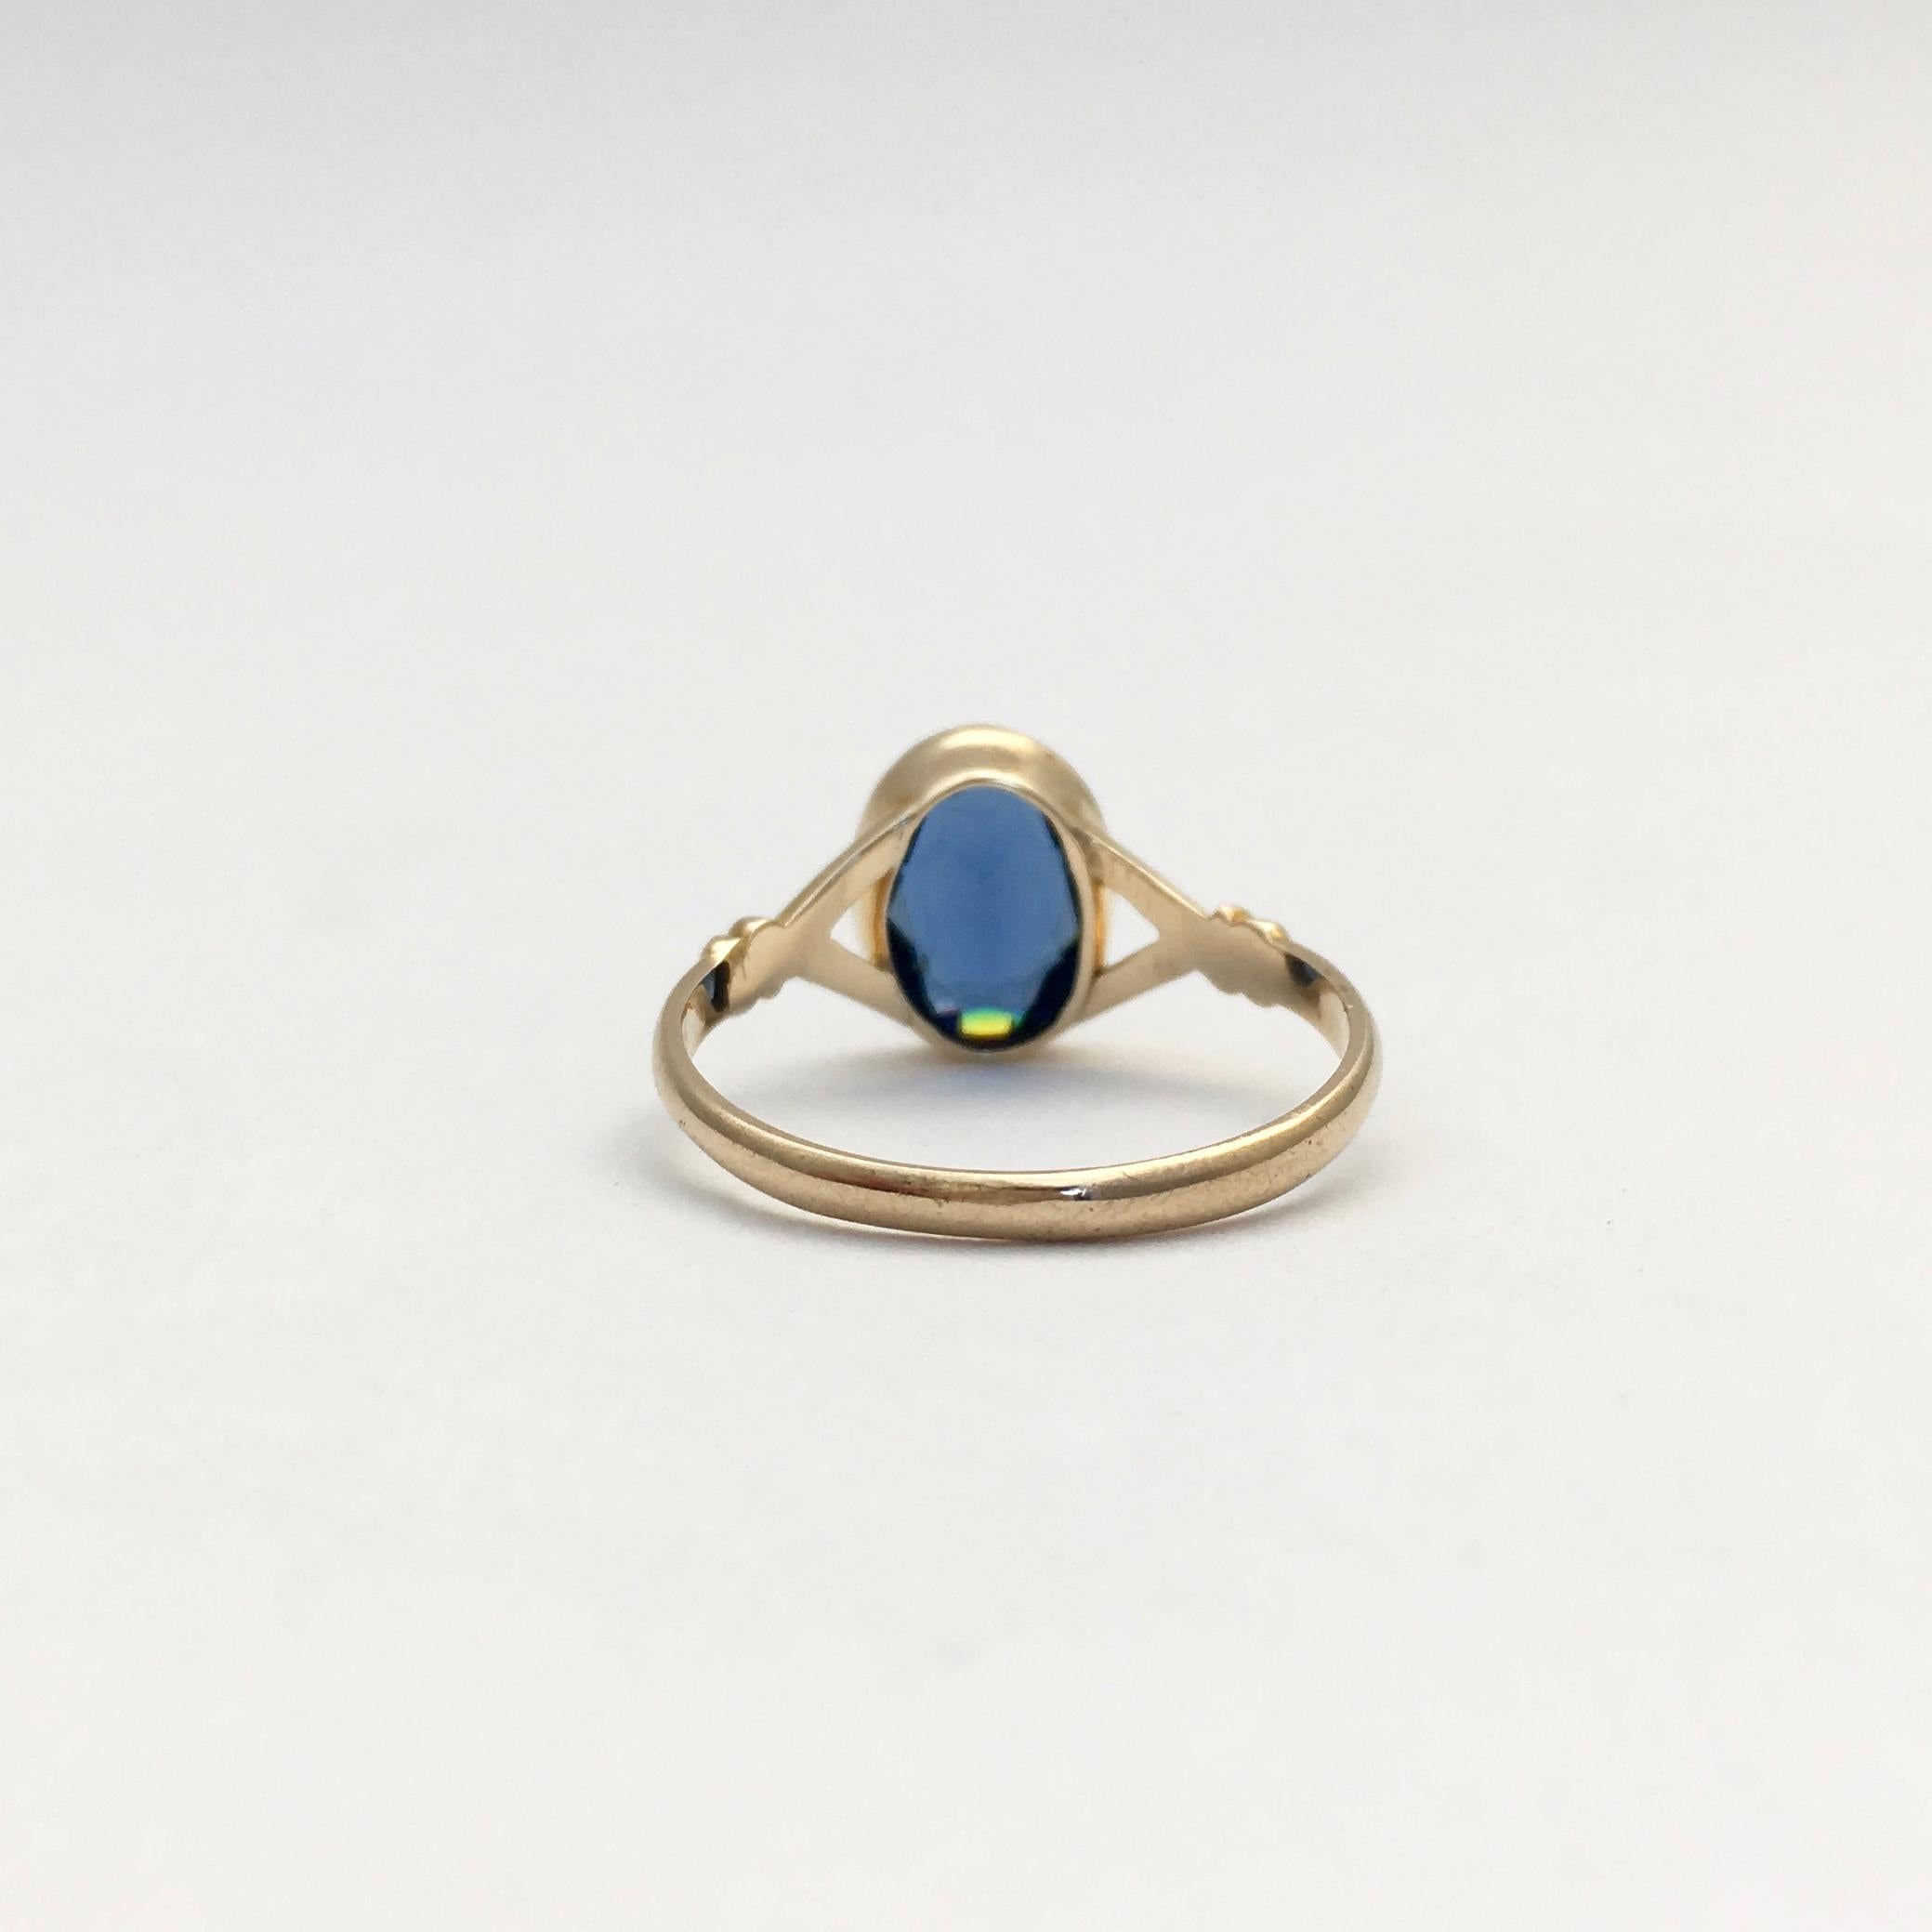 Gold Vintage Jewelry Blue Glass Synthetic Gemstone Paste Ring 1920s Dainty In Excellent Condition For Sale In London, GB